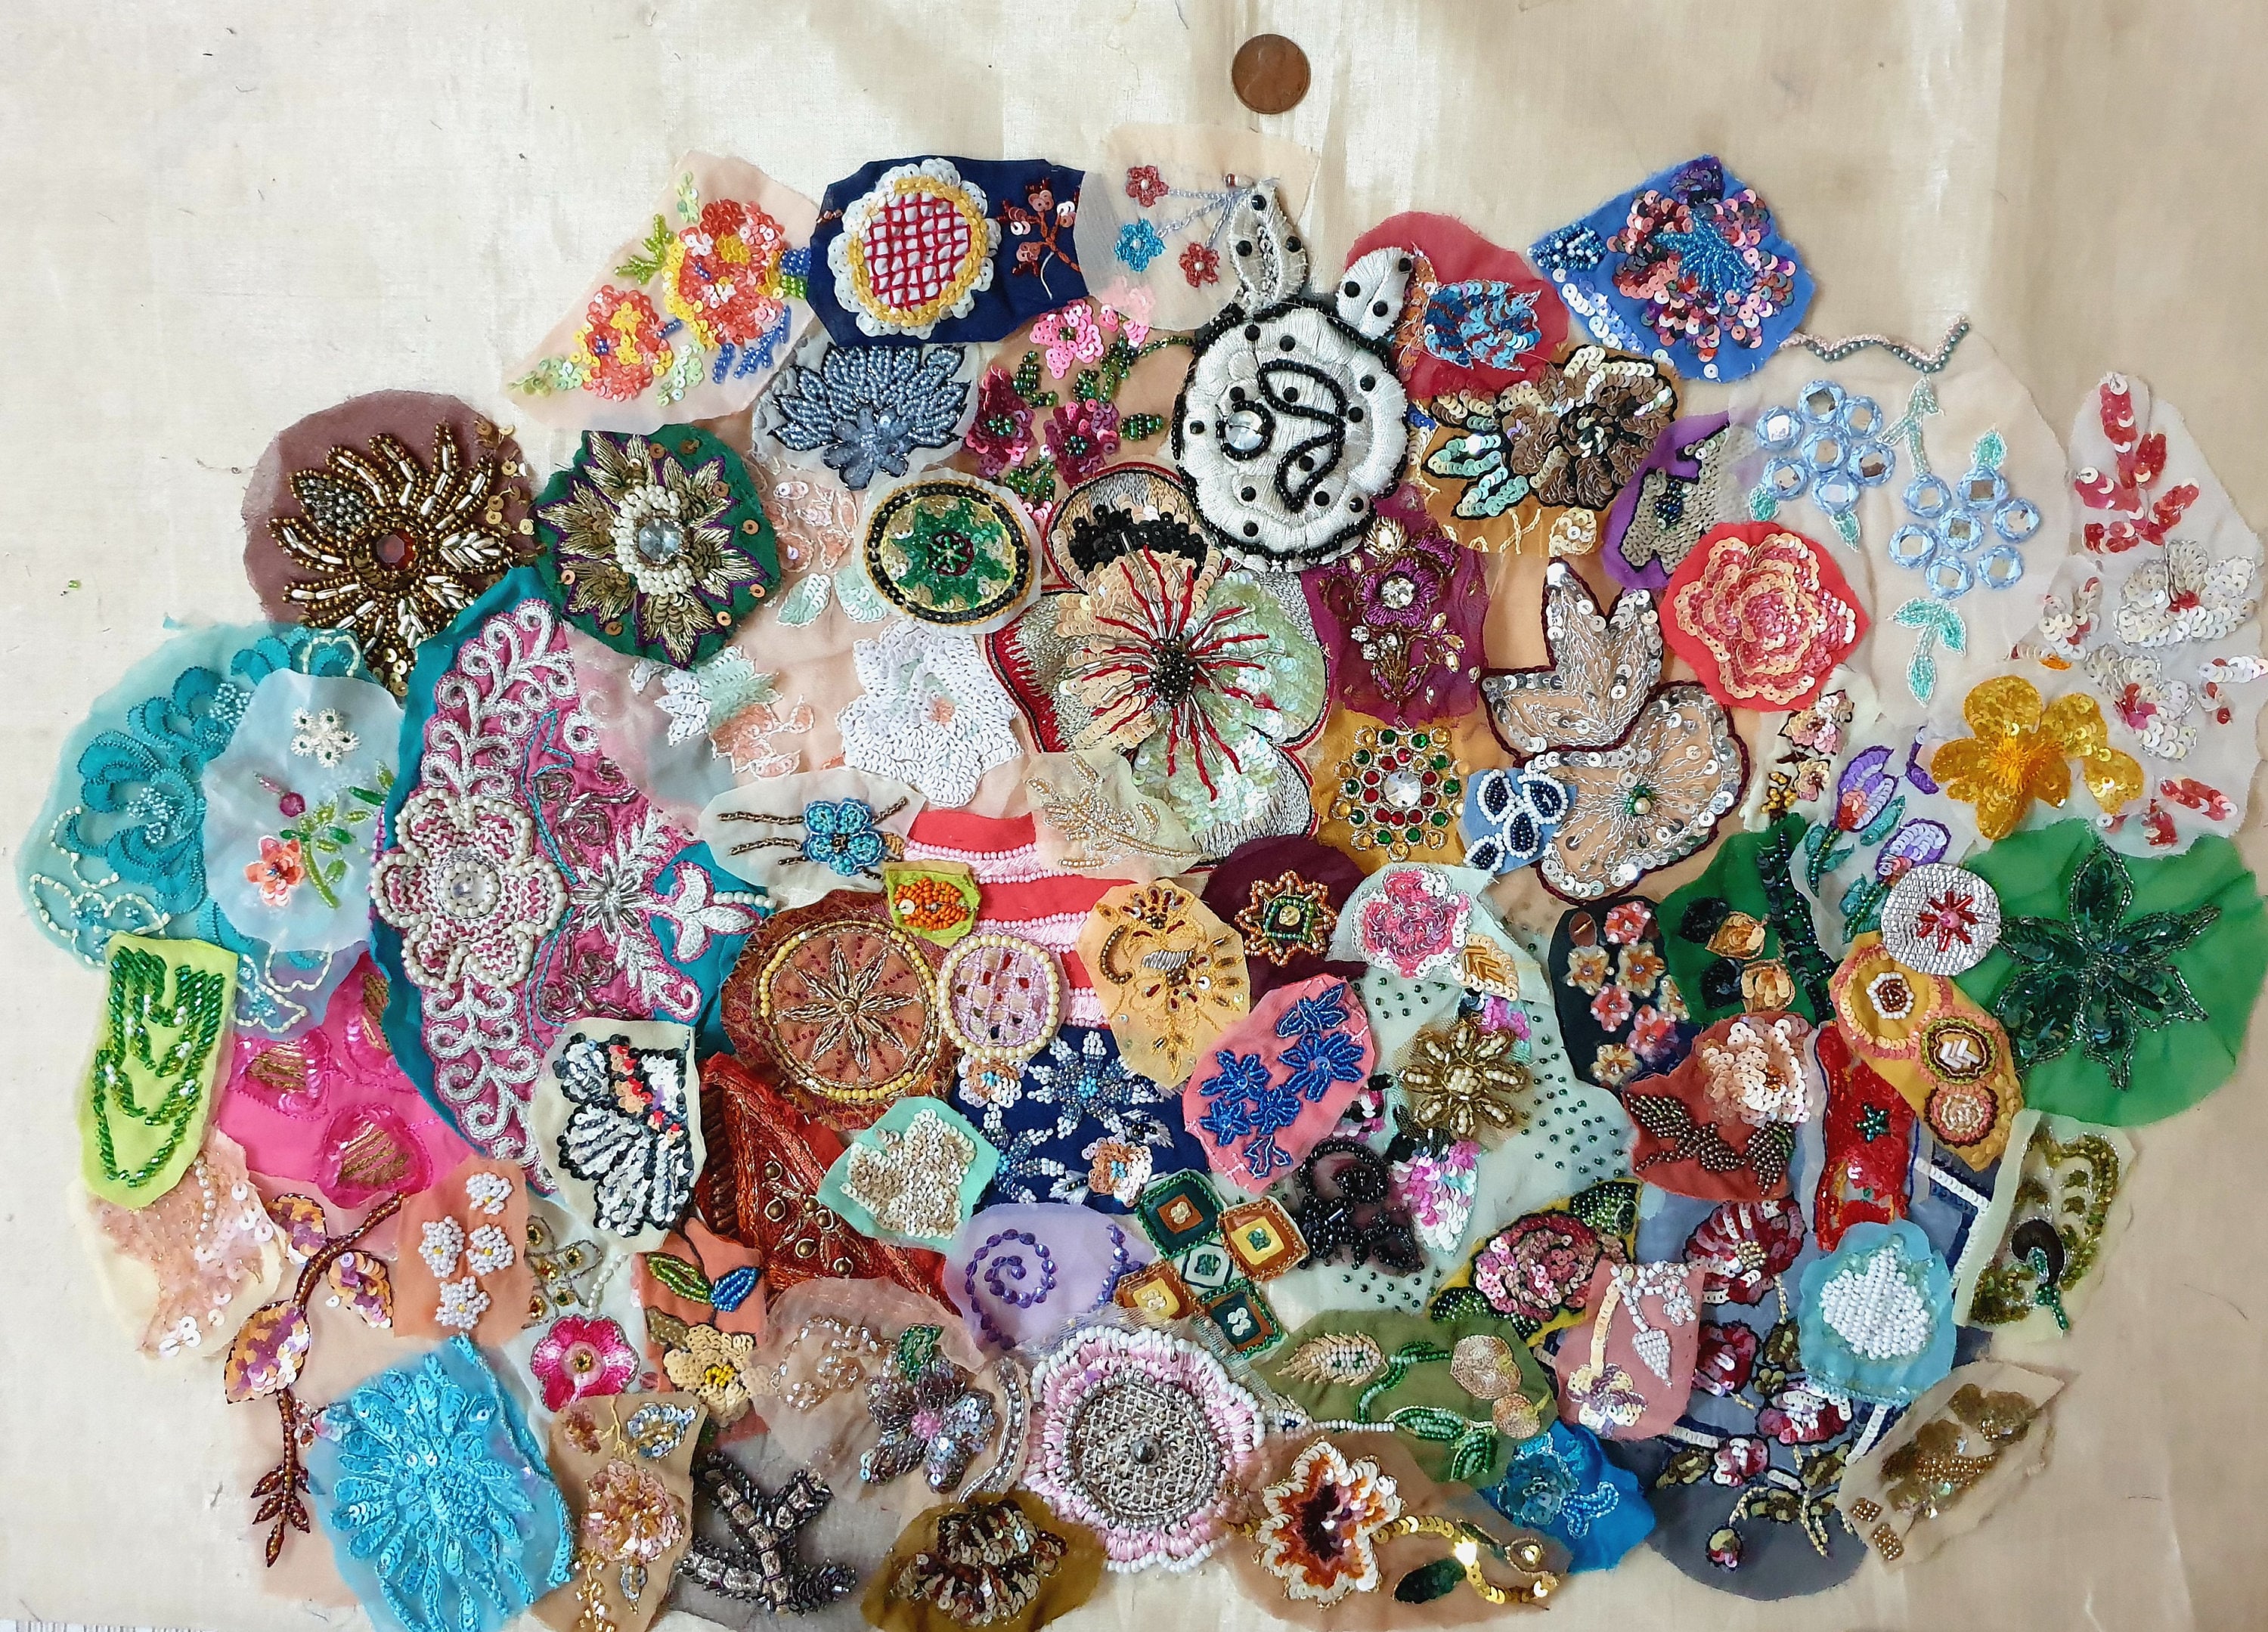 Bead & Sequin Patch: Patches Trimmings from India, SKU 00065928 at